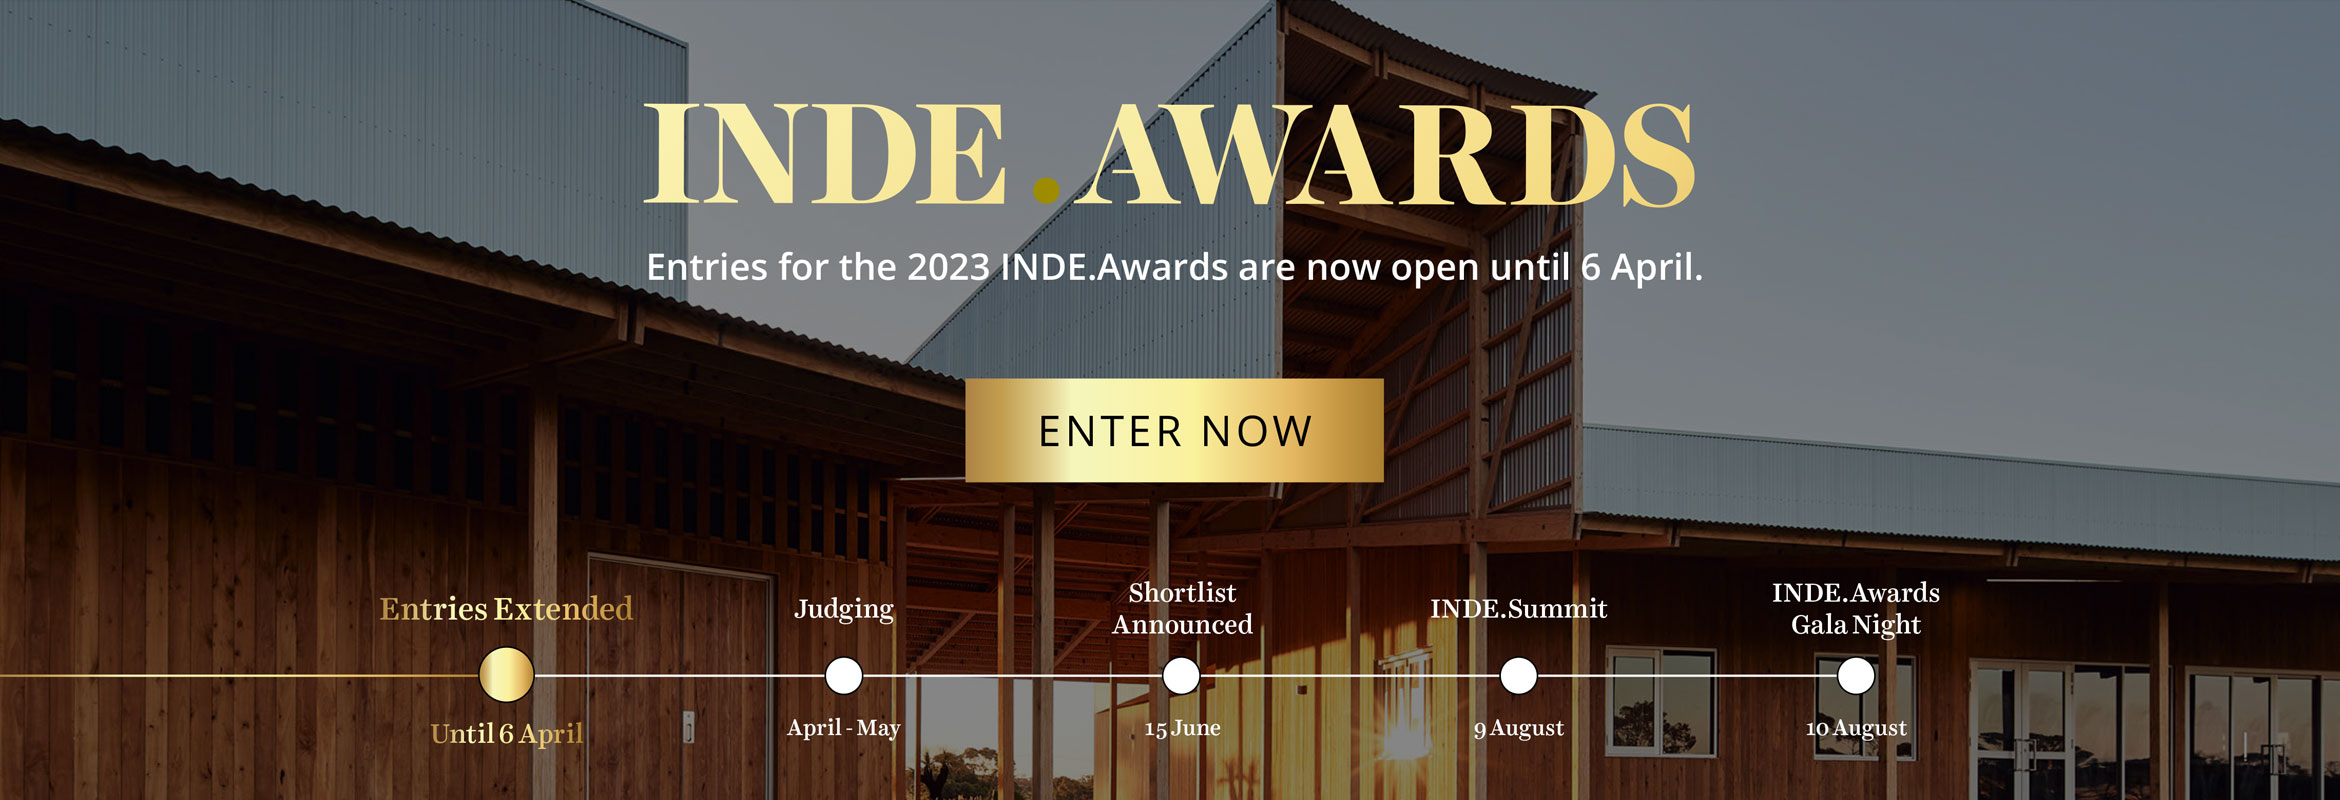 Entries for the 2023 INDE.Awards are now open.